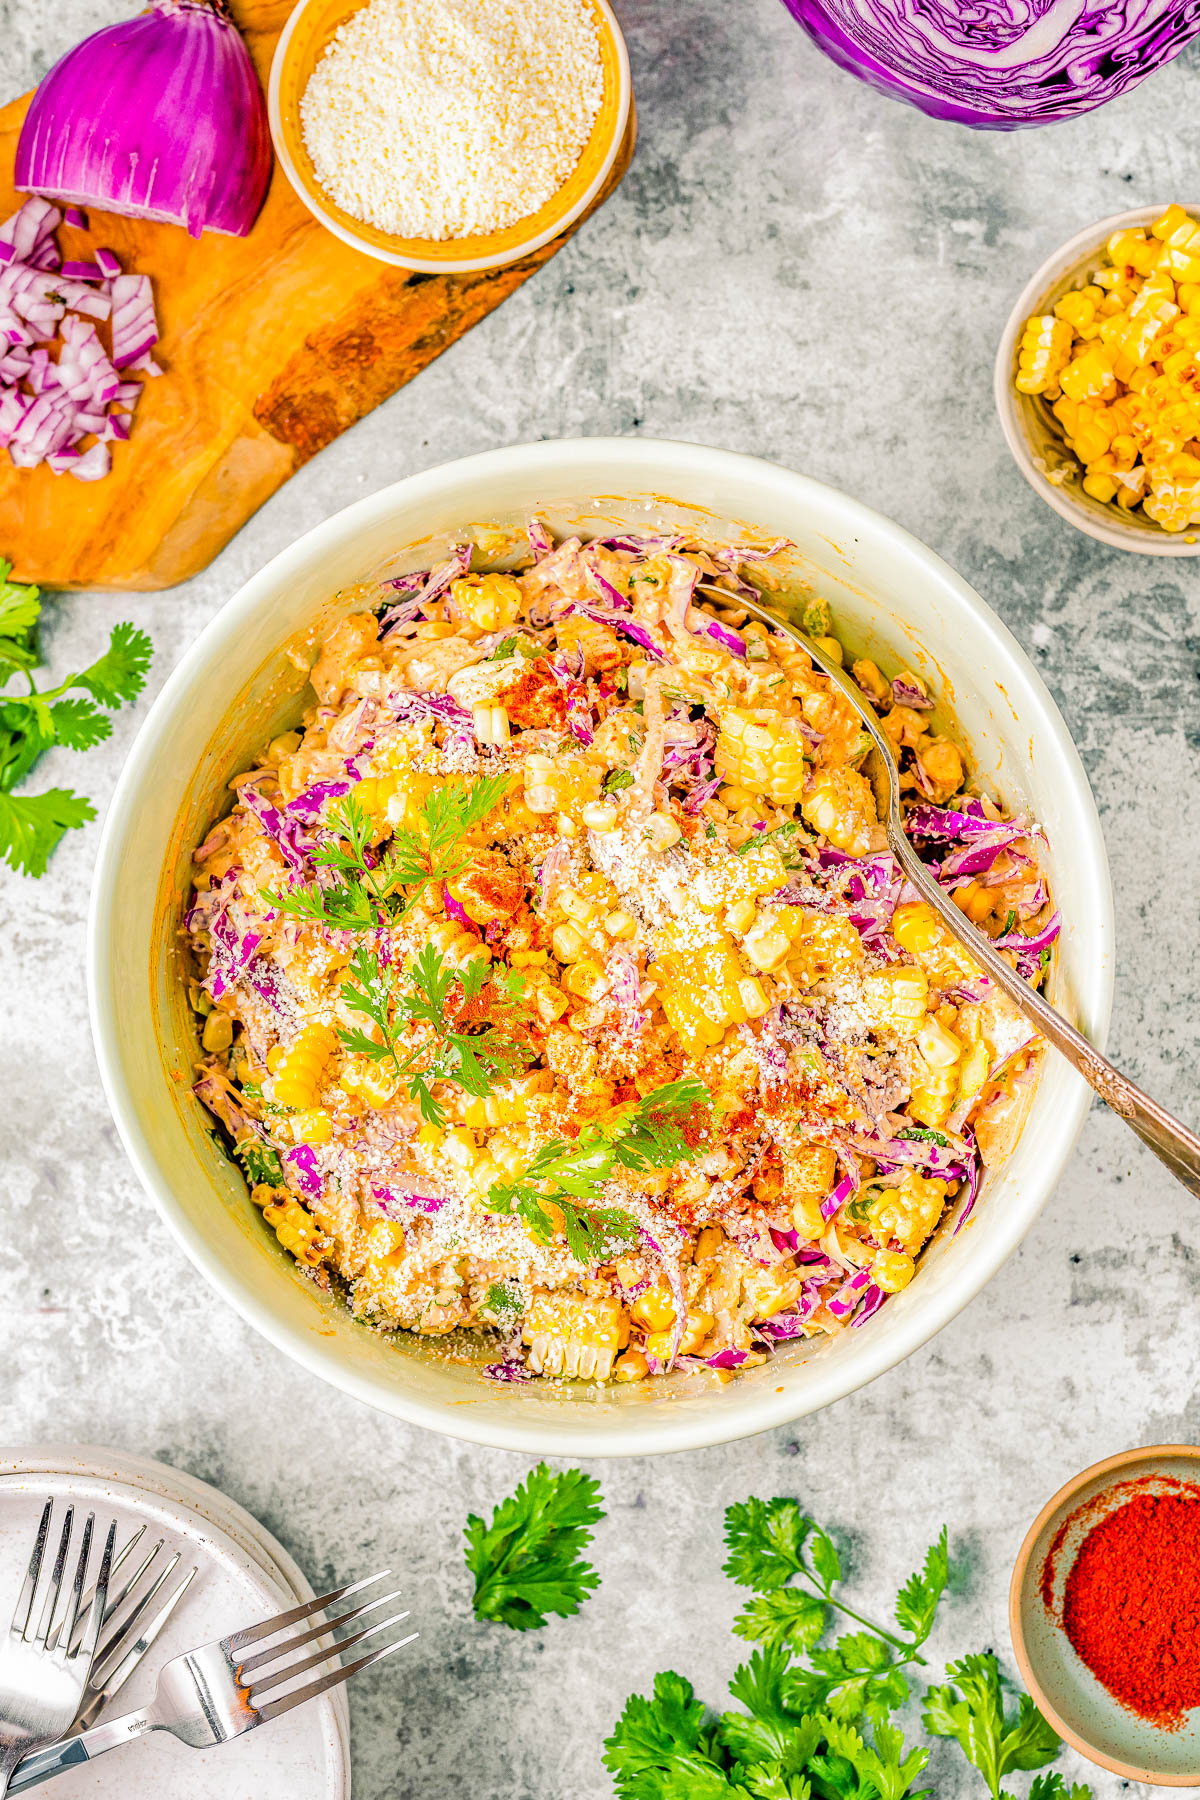 A vibrant bowl of corn salad with purple cabbage and parsley, surrounded by bowls of ingredients and spices on a textured surface.